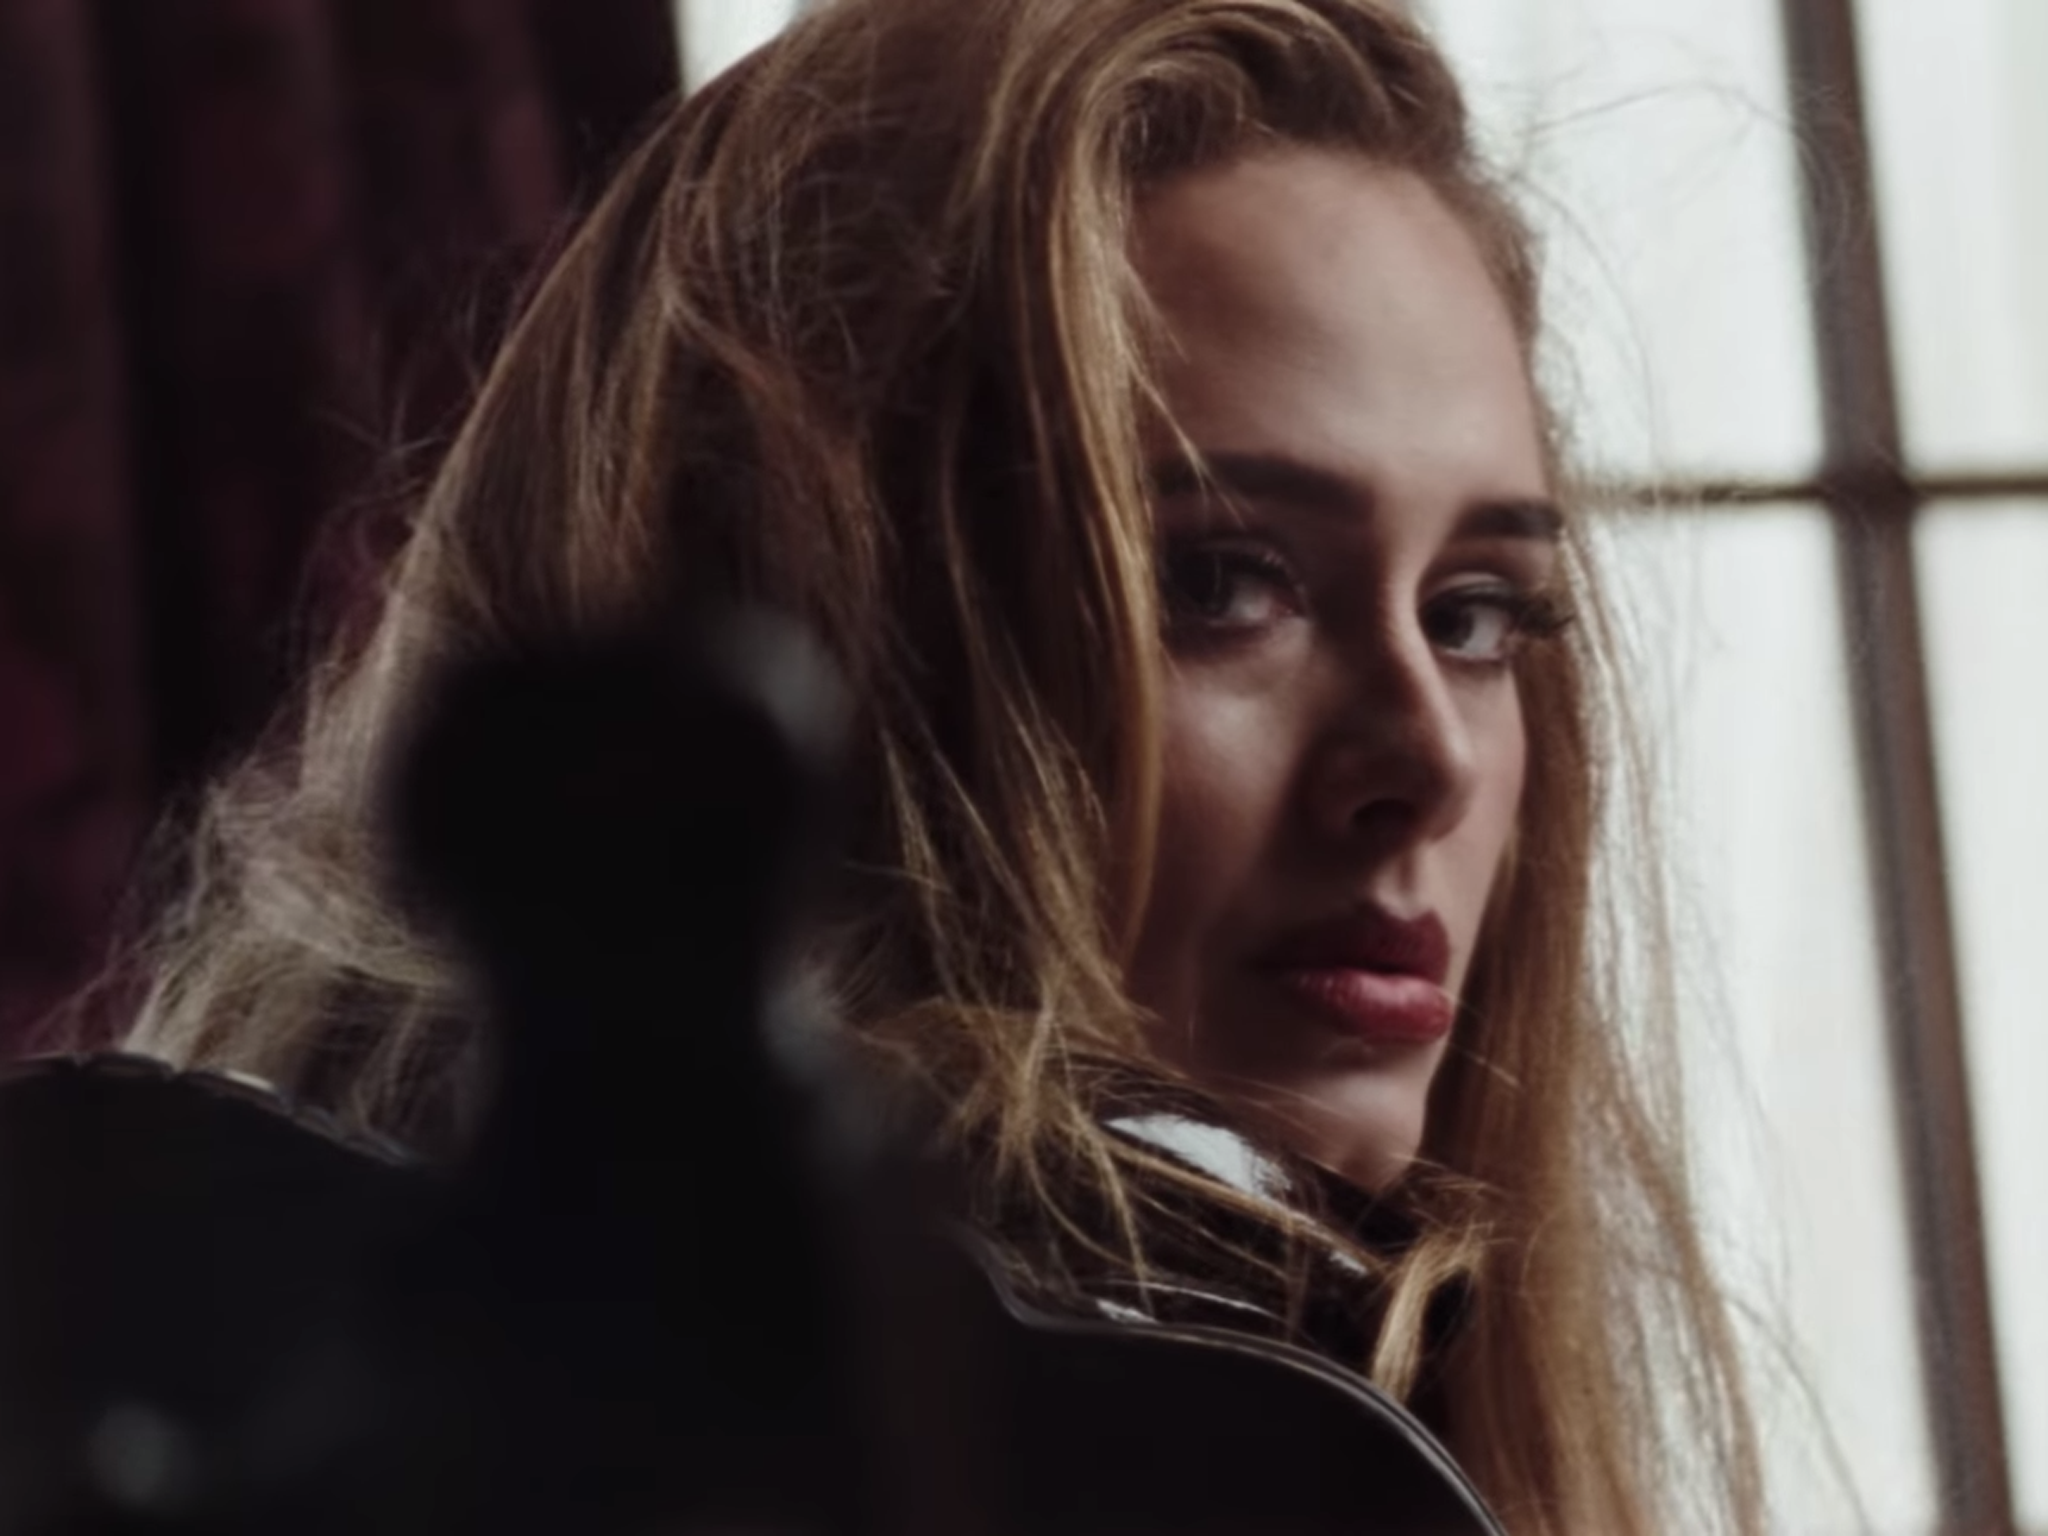 Adele in the music video for ‘Easy on Me’